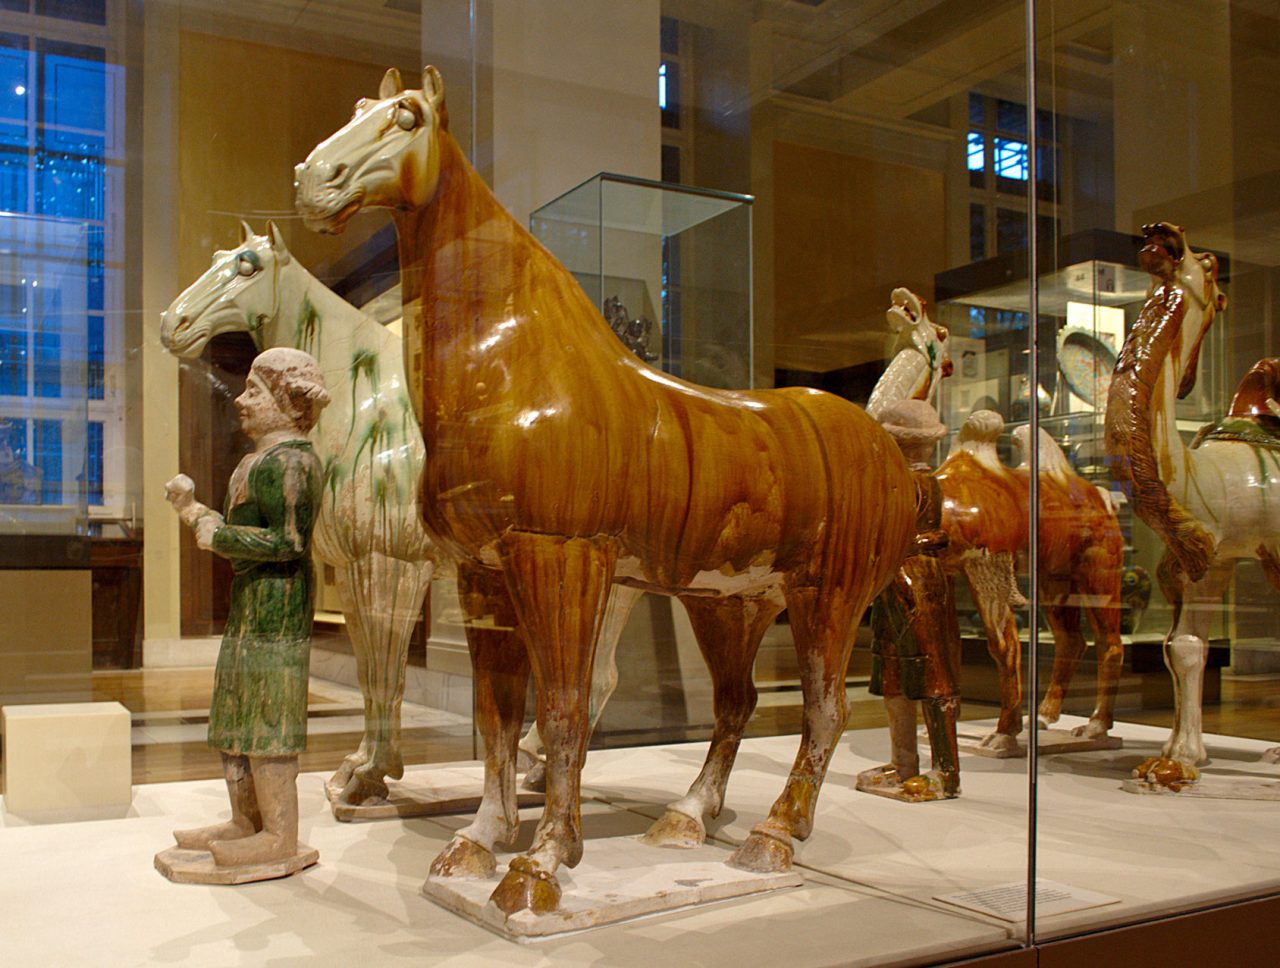 Tang dynasty figures in the British Museum (Photo: Margaret [CC BY-SA 2.0 (https://creativecommons.org/licenses/by-sa/2.0)], via Wikimedia Commons)